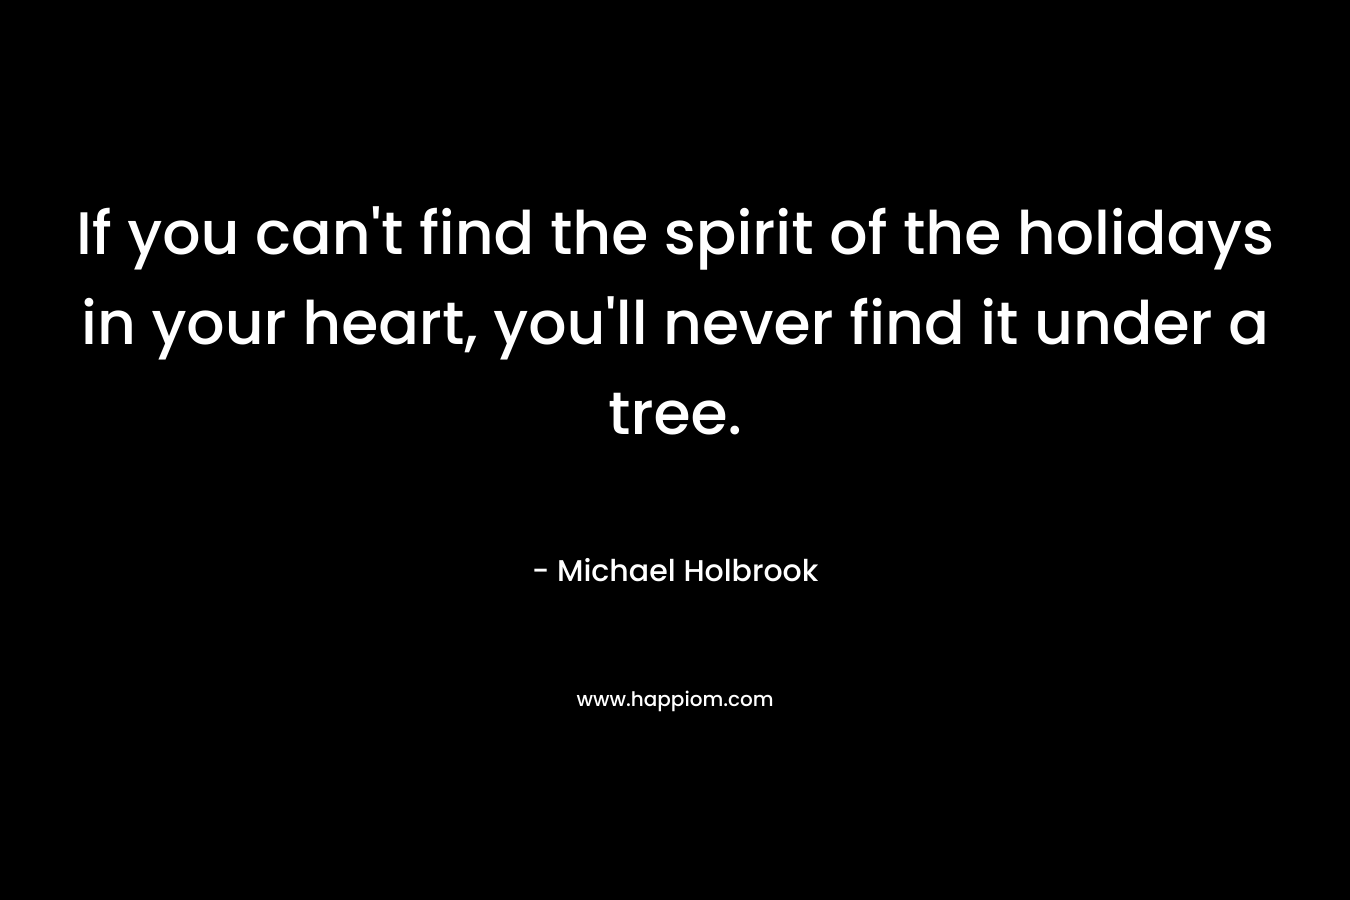 If you can’t find the spirit of the holidays in your heart, you’ll never find it under a tree. – Michael Holbrook